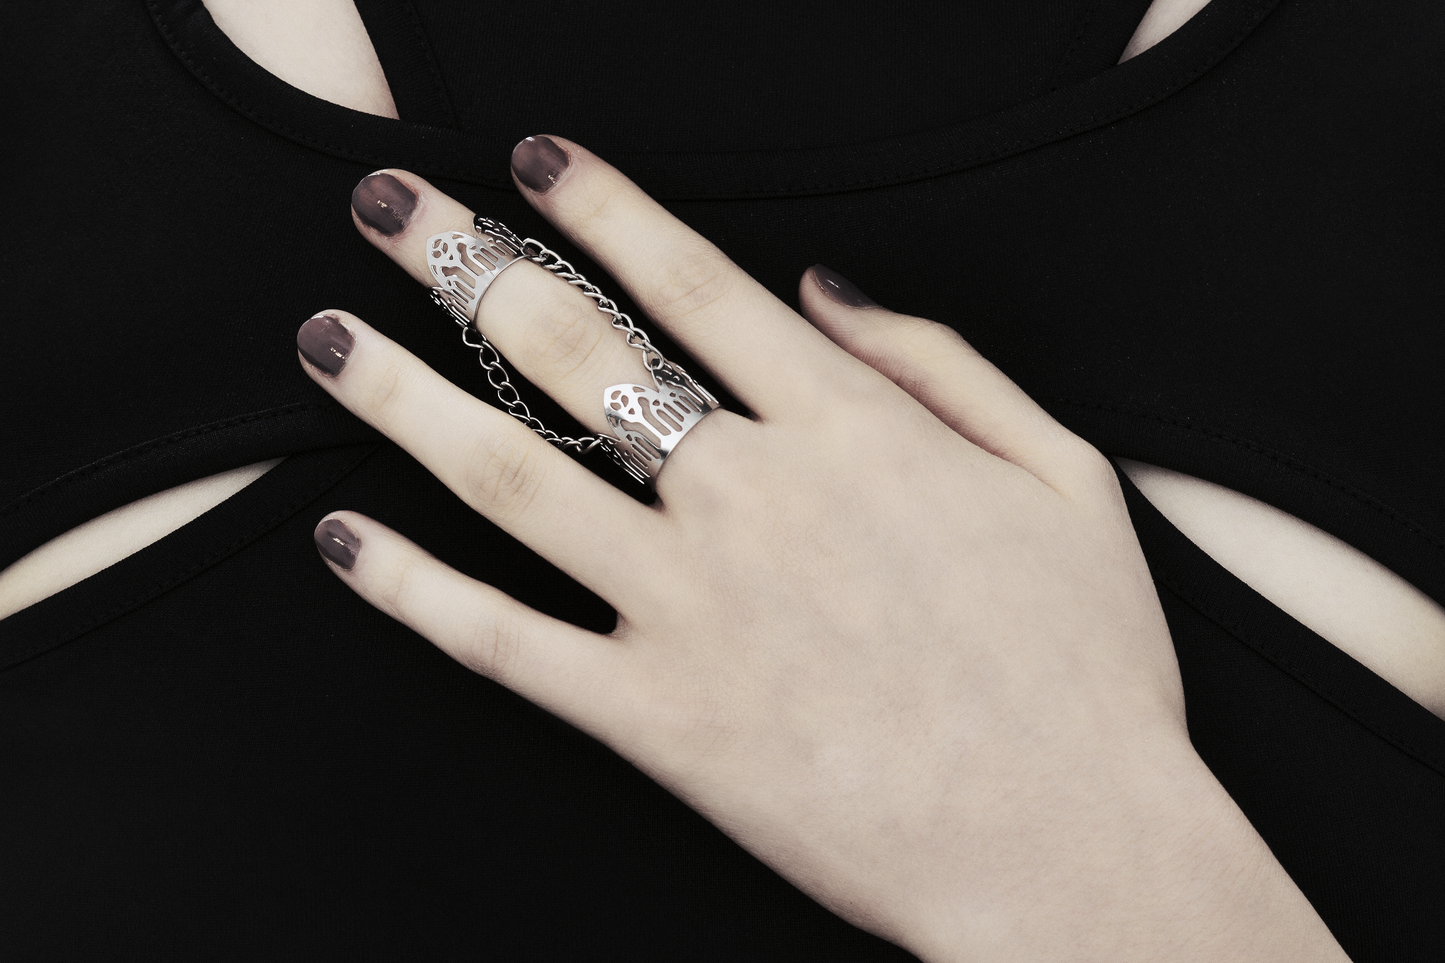 A model's hand is adorned with a Myril Jewels double ring, inspired by gothic arches, against a black top with cut-out details. The ring showcases the brand's dark-avantgarde style, ideal for gothic and alternative fashion aficionados. With a design perfect for Halloween, the ring also suits everyday wear, contributing to a minimal goth look or as an accent for rave party and festival attire. It embodies the gothic-chic and whimsigoth essence, making it a unique addition to any witchcore jewelry collection